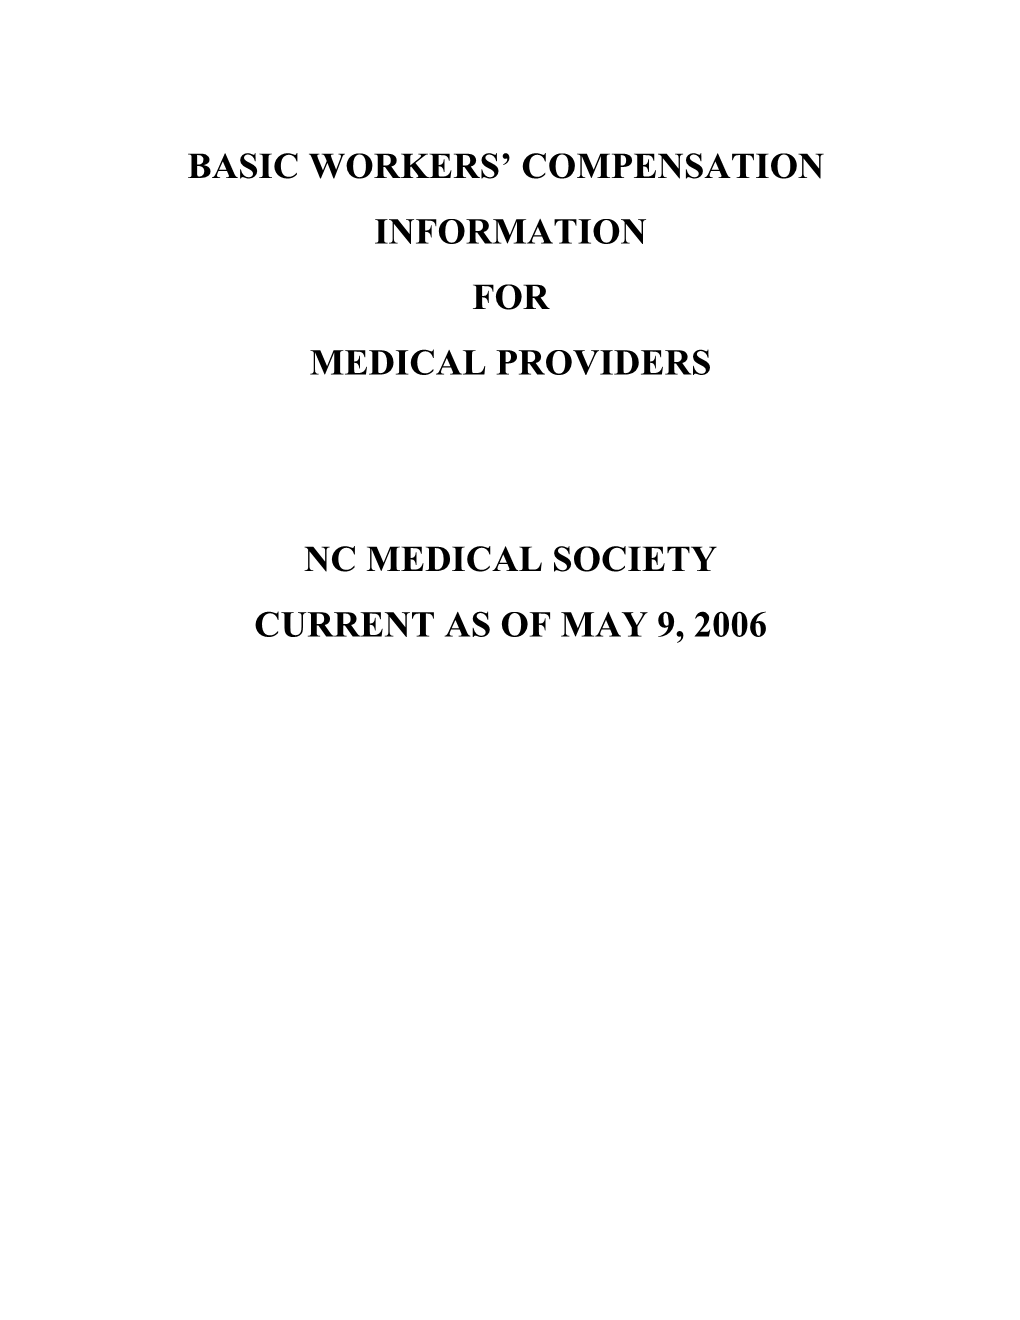 Basic Workers’ Compensation Information For Medical Providers